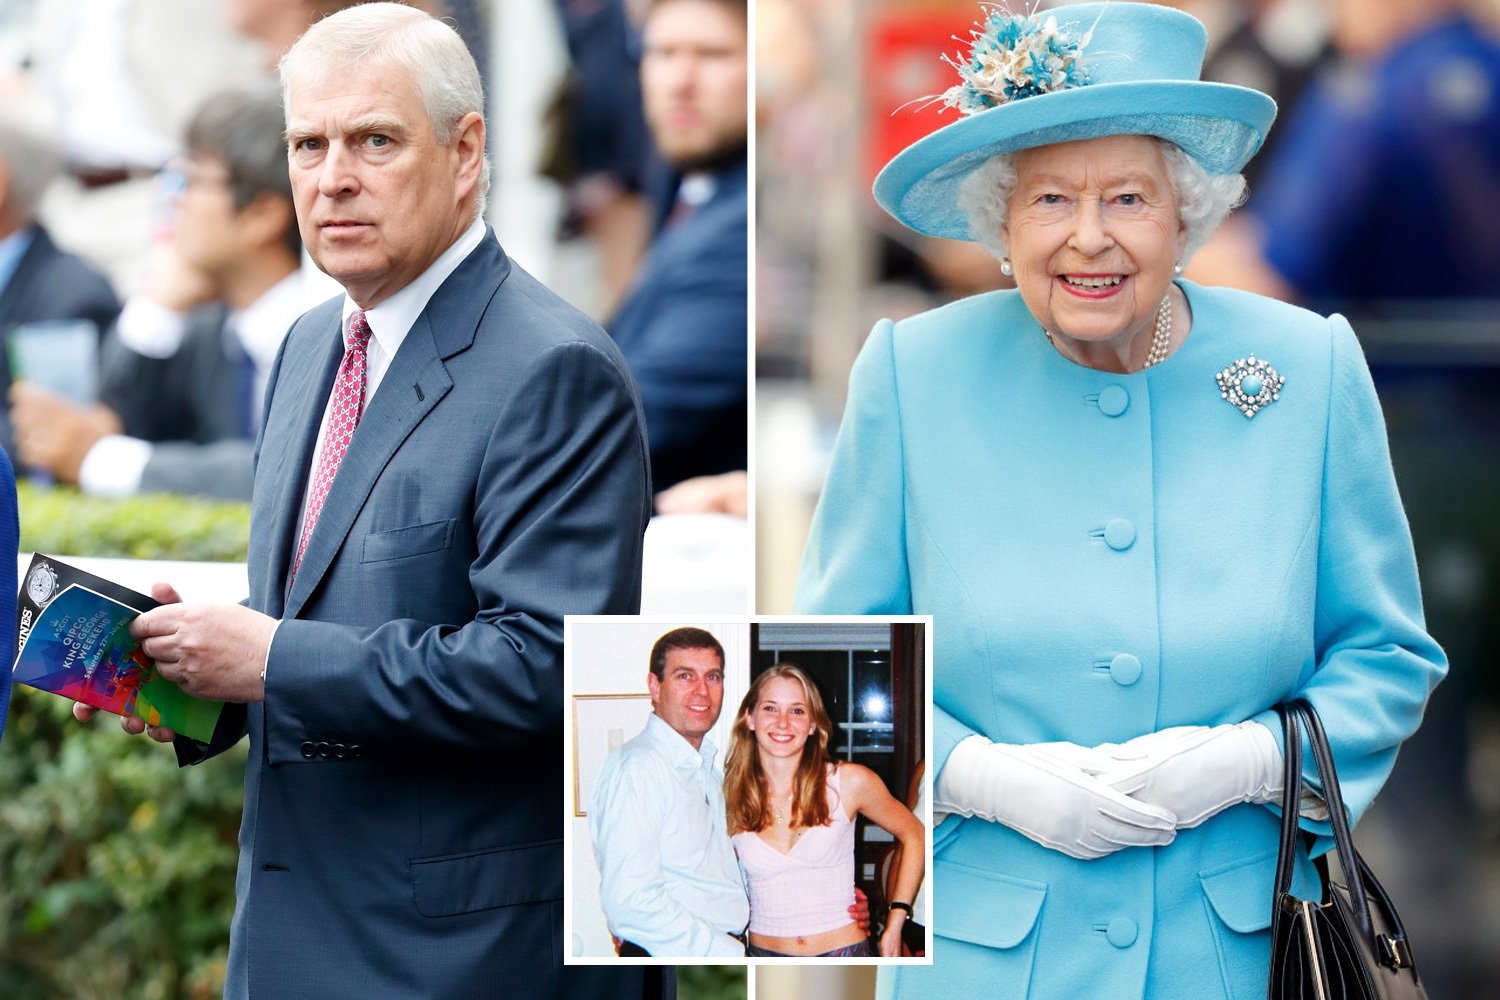 'WALL OF SILENCE' Prince Andrew’s game of cat and mouse over sex abuse lawsuit is ‘damaging monarchy,’ courtiers believe